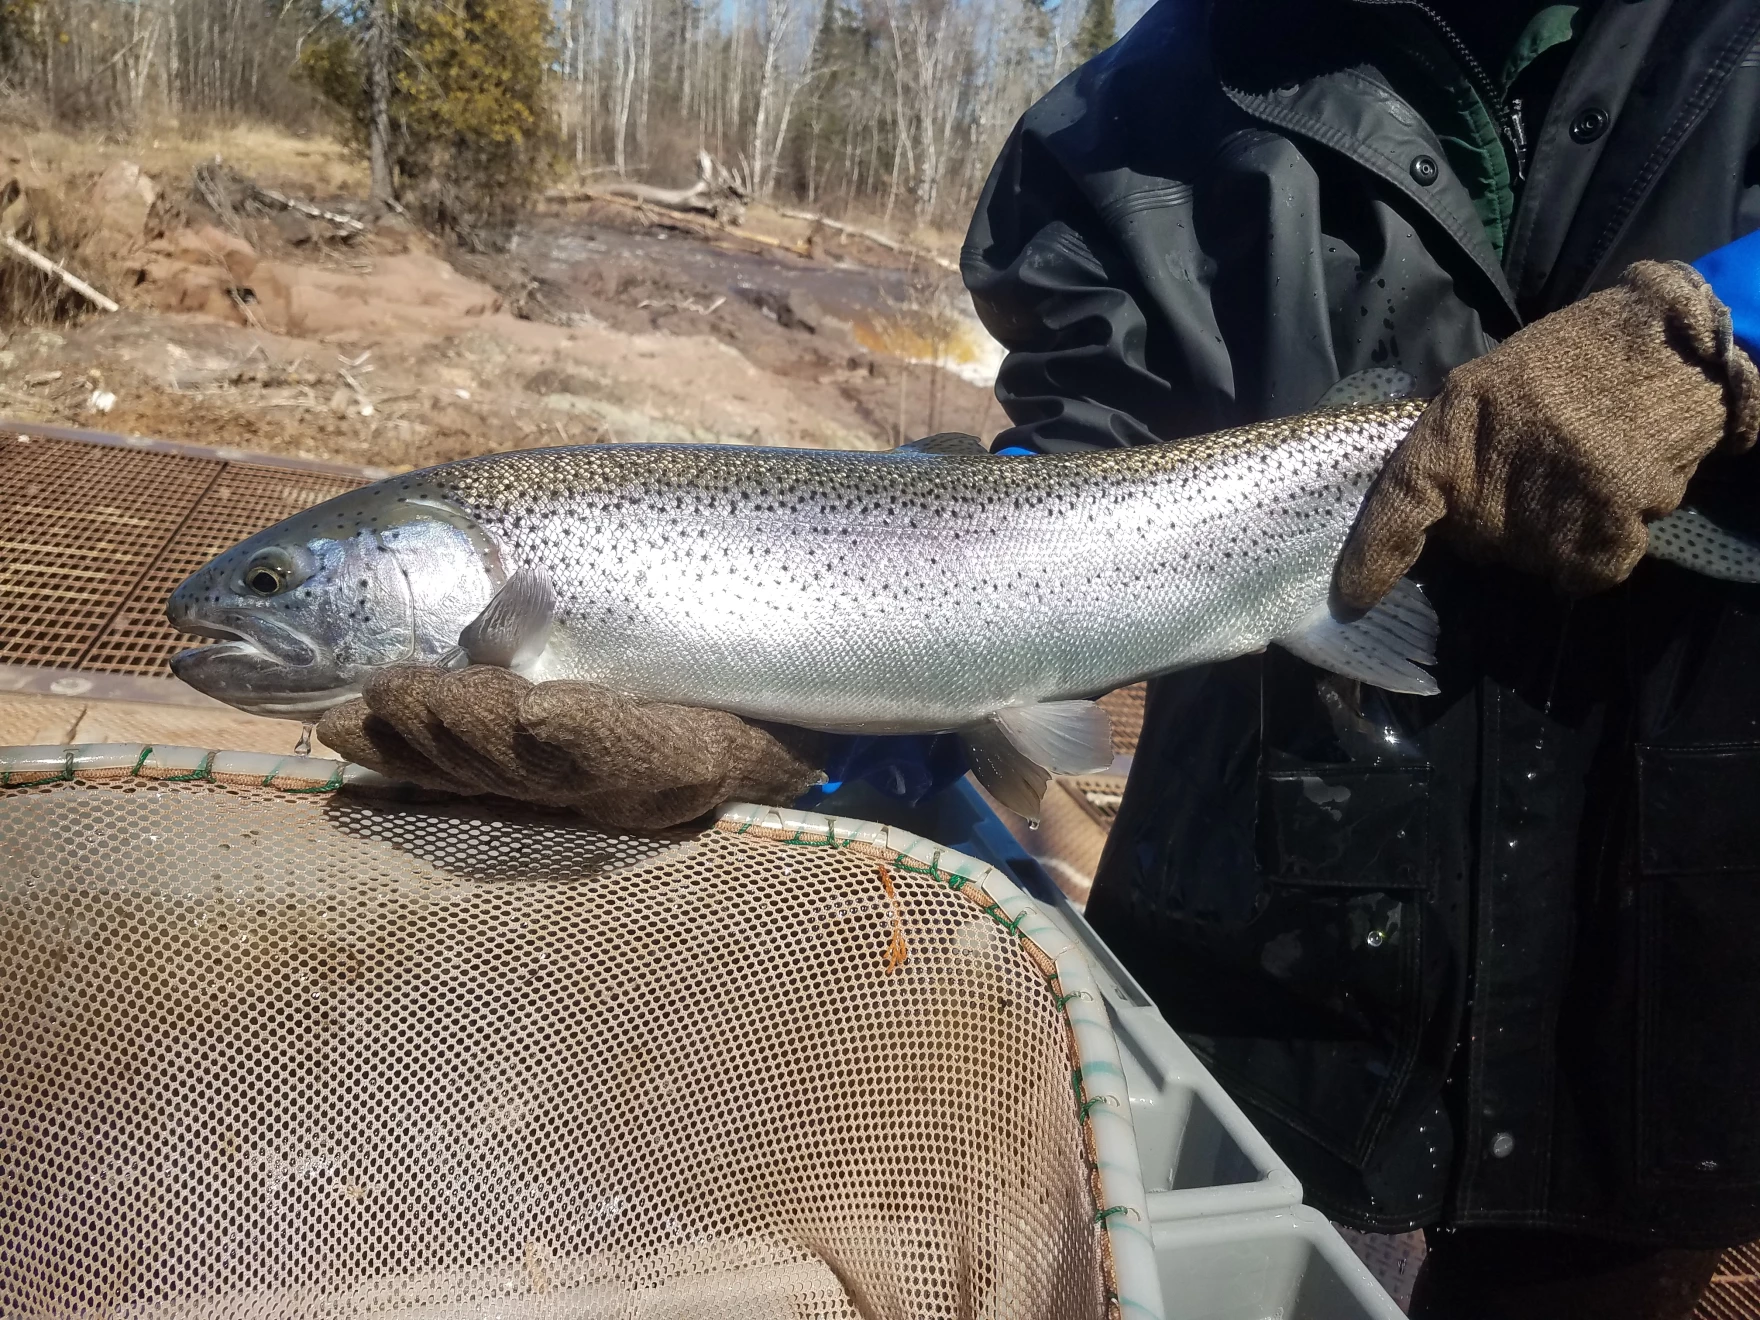 Concerns about Michigan steelhead populations prompt new catch limits